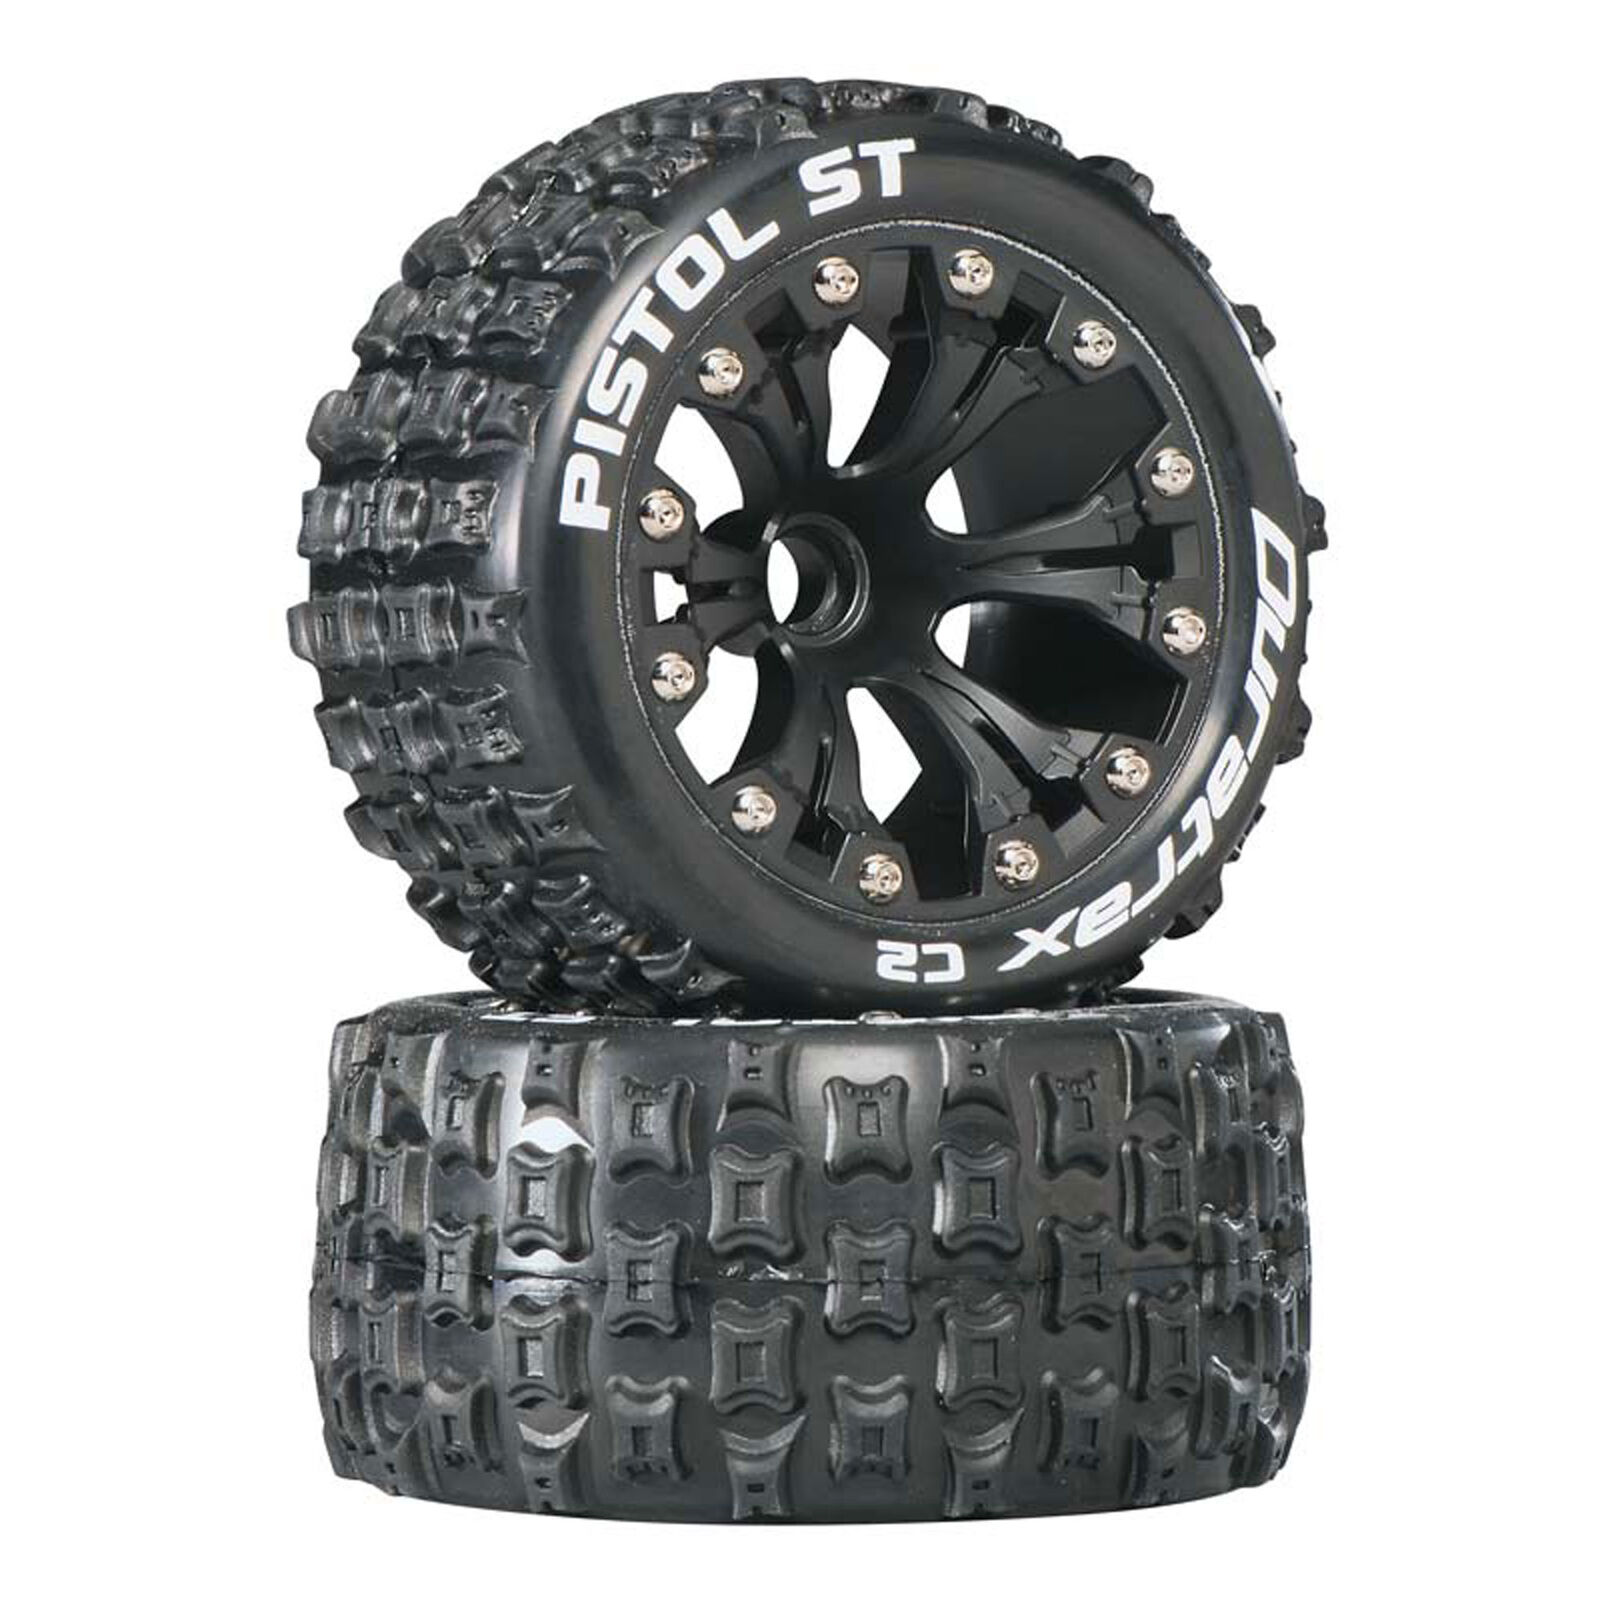 Pistol ST 2.8" 2WD Mounted Front C2 Tires, Black (2)